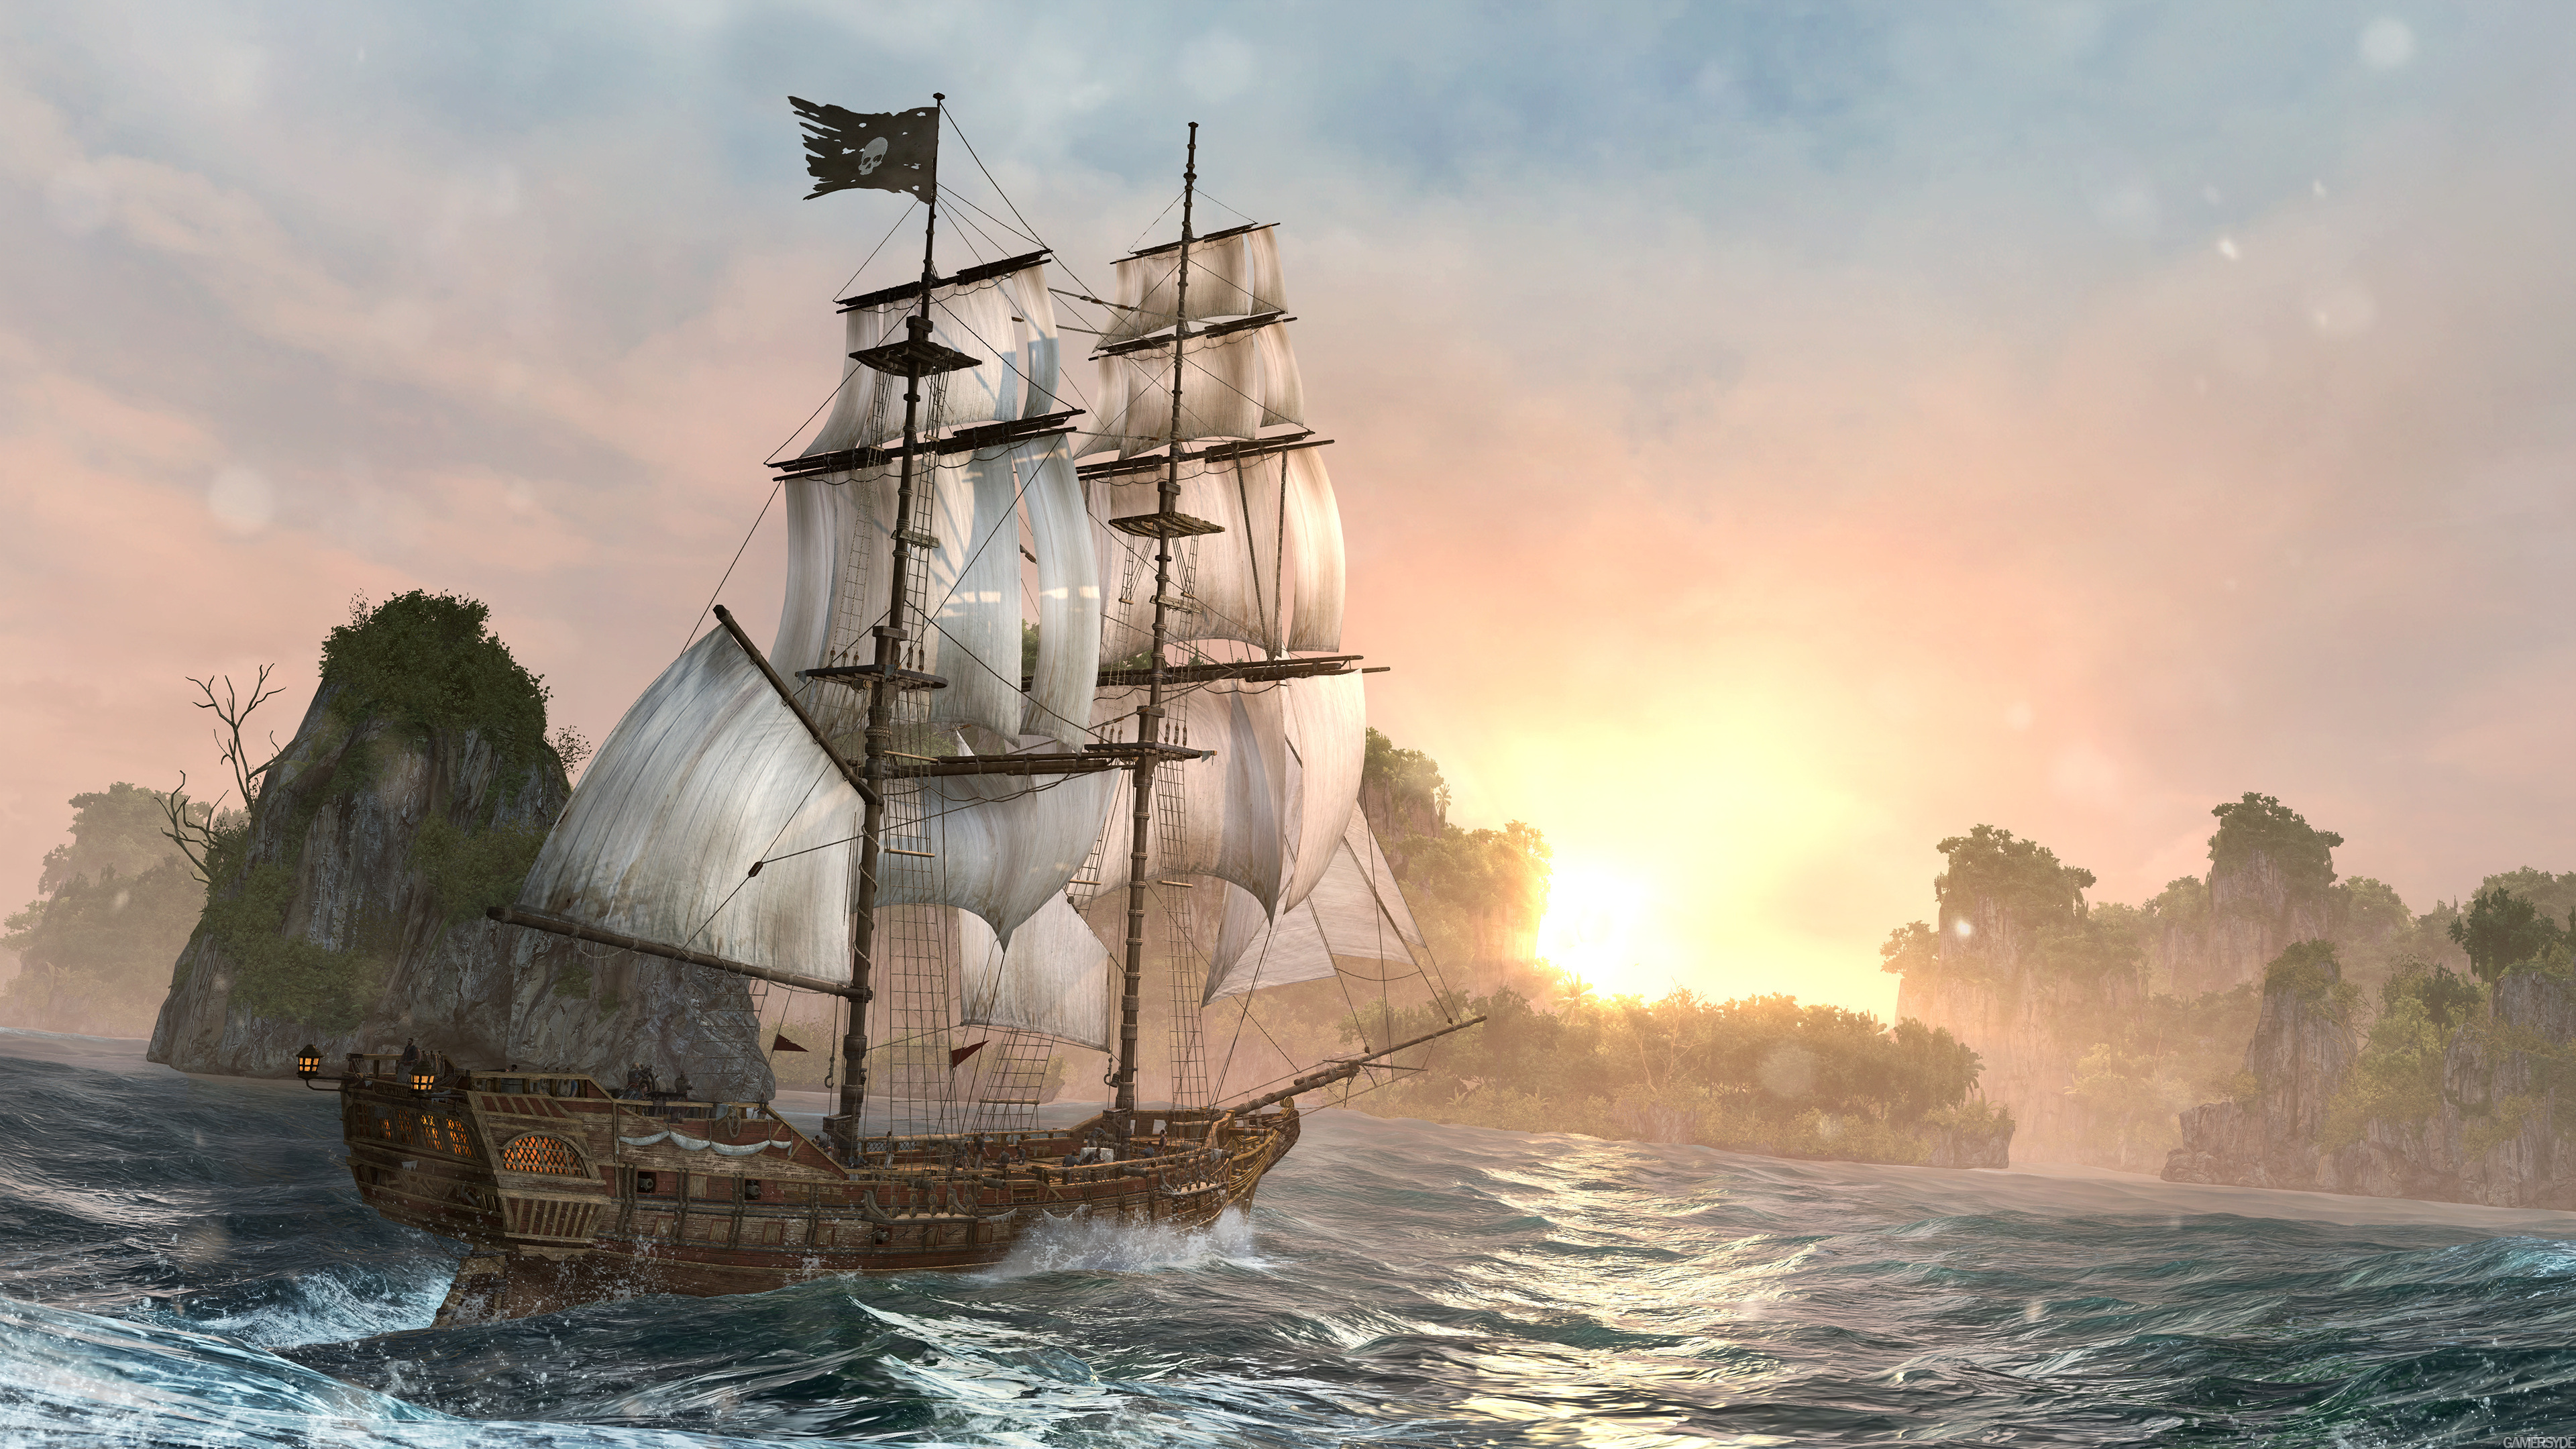 120+ Assassin's Creed IV: Black Flag HD Wallpapers and Backgrounds